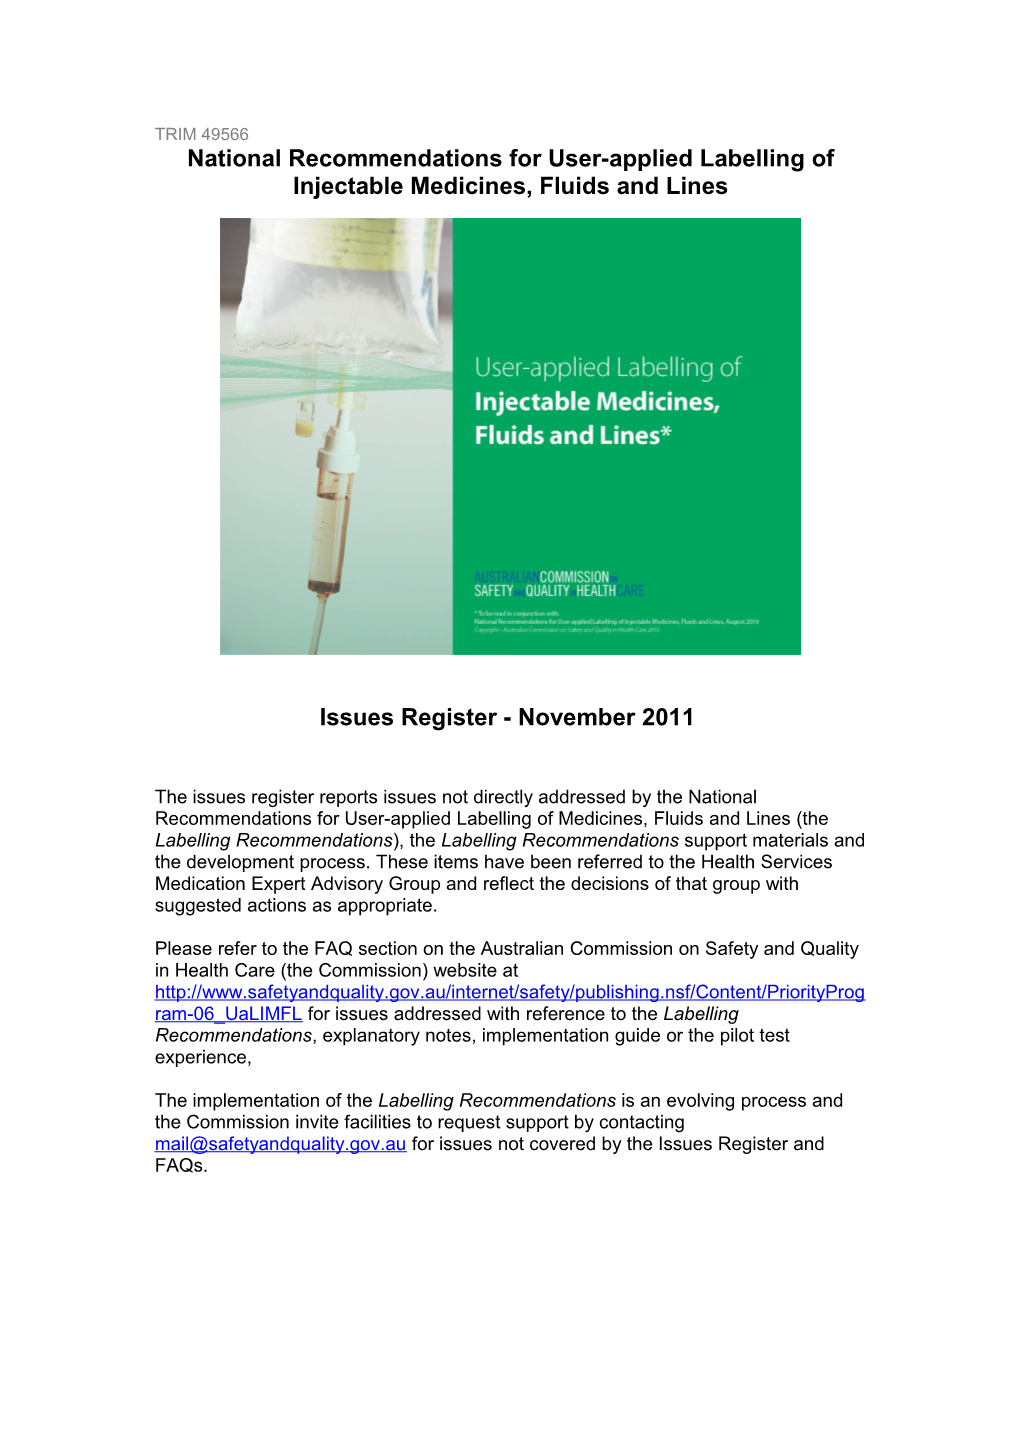 National Recommendations for User-Applied Labelling of Injectable Medicines, Fluids and Lines